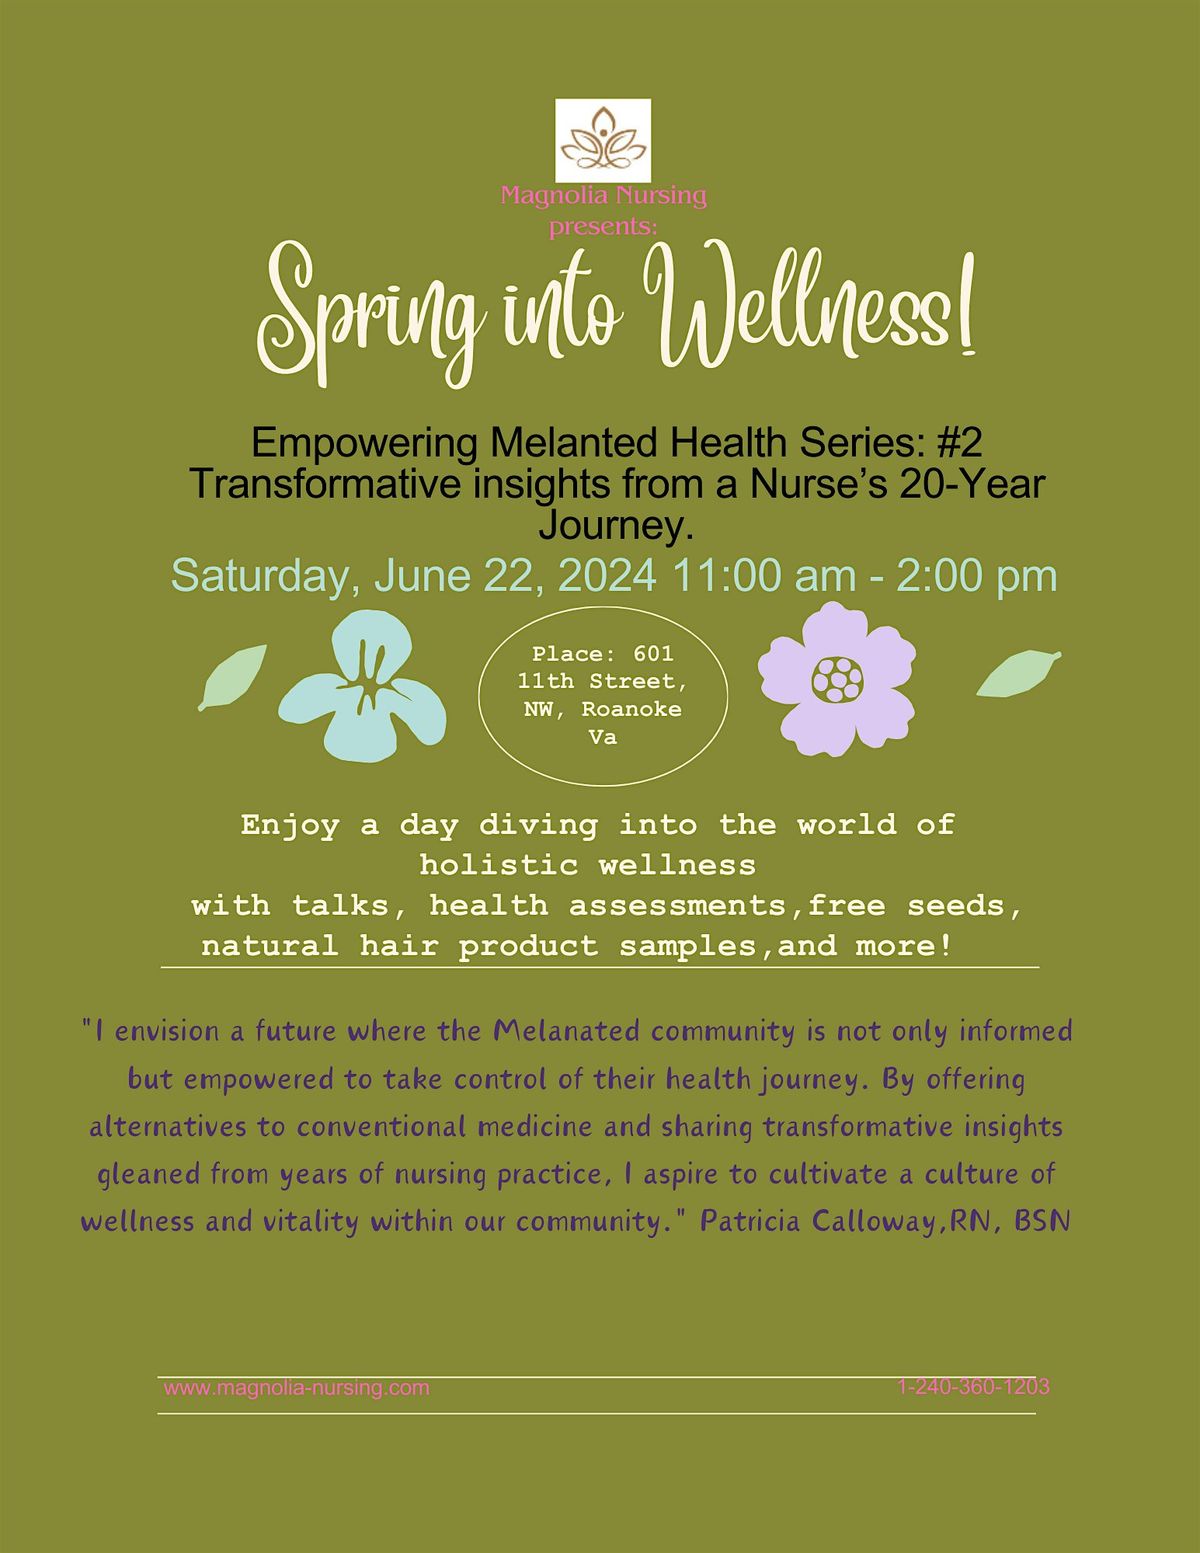 Spring into Wellness!  Empowering melanted health